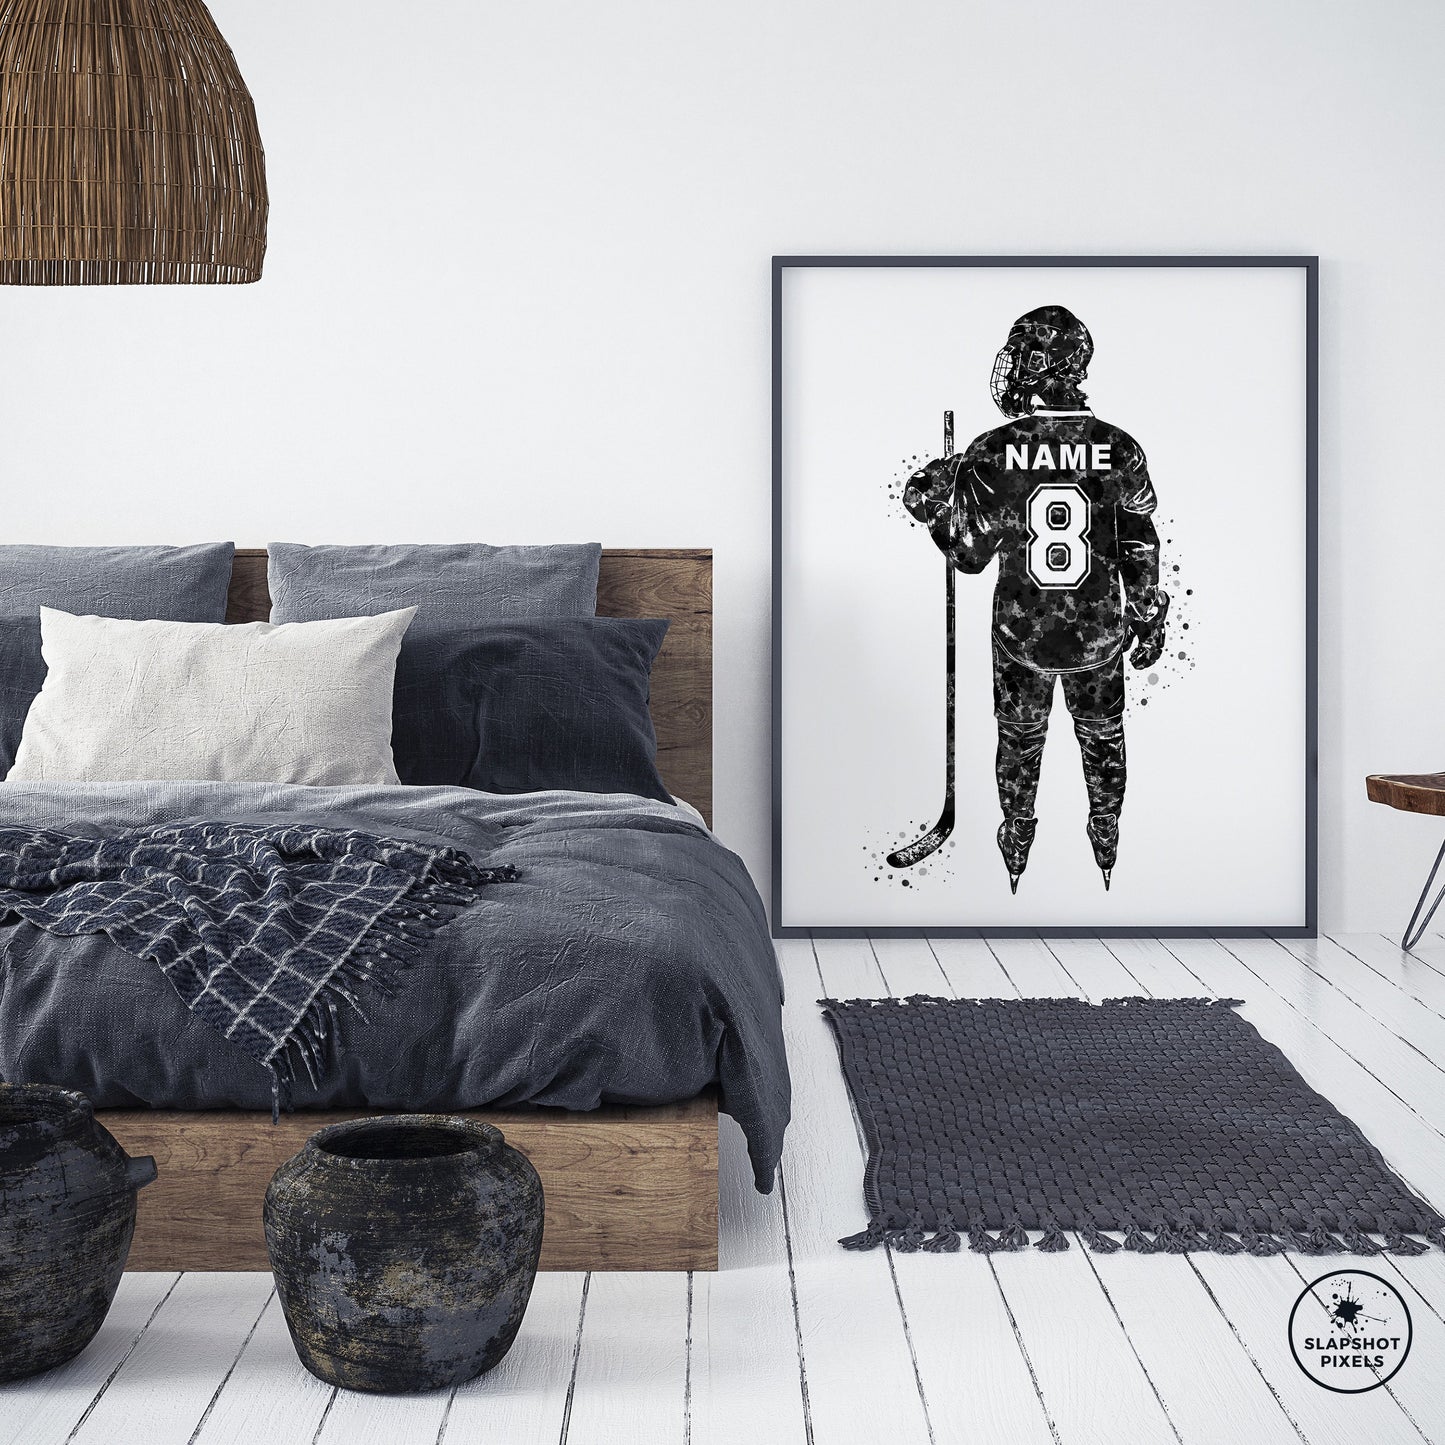 Personalized hockey poster showing back of hockey player with custom name and number on the hockey jersey. Designed in watercolor splatters. Perfect hockey gifts for boys, hockey team gifts, hockey coach gift, hockey wall art décor in a hockey bedroom and birthday gifts for hockey players.